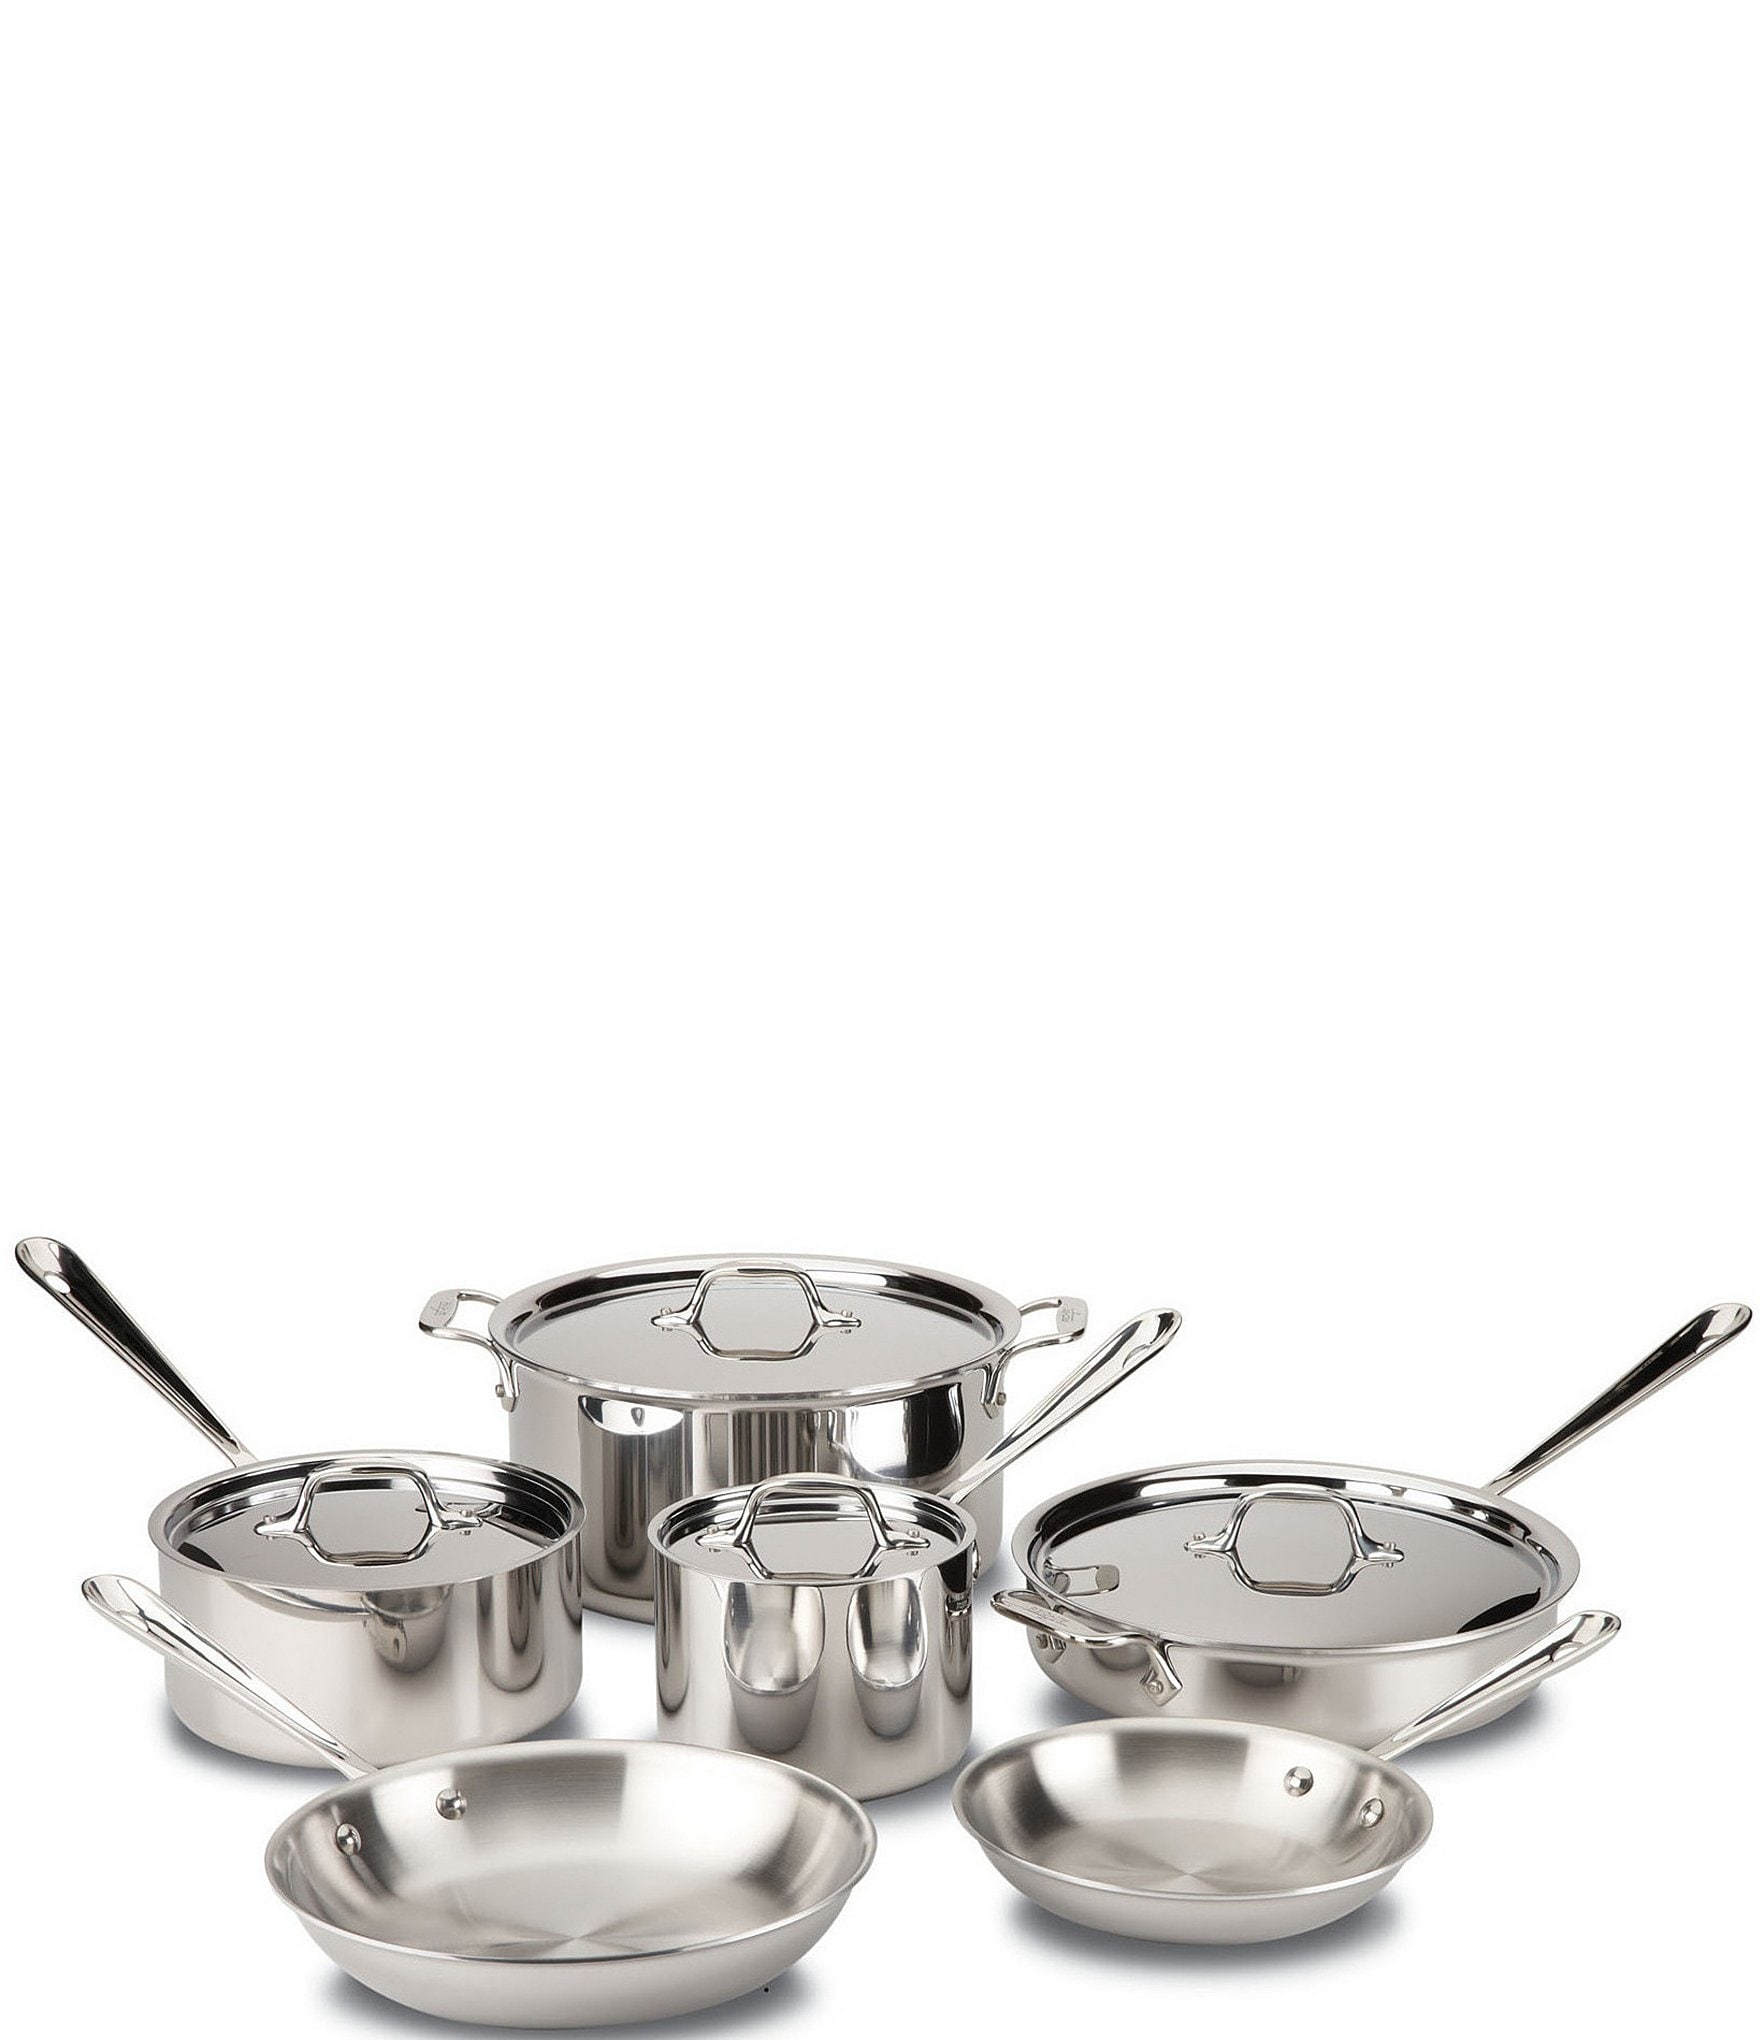 https://dimg.dillards.com/is/image/DillardsZoom/zoom/all-clad-three-ply-stainless-steel-10-piece-cookware-set/03989526_zi.jpg